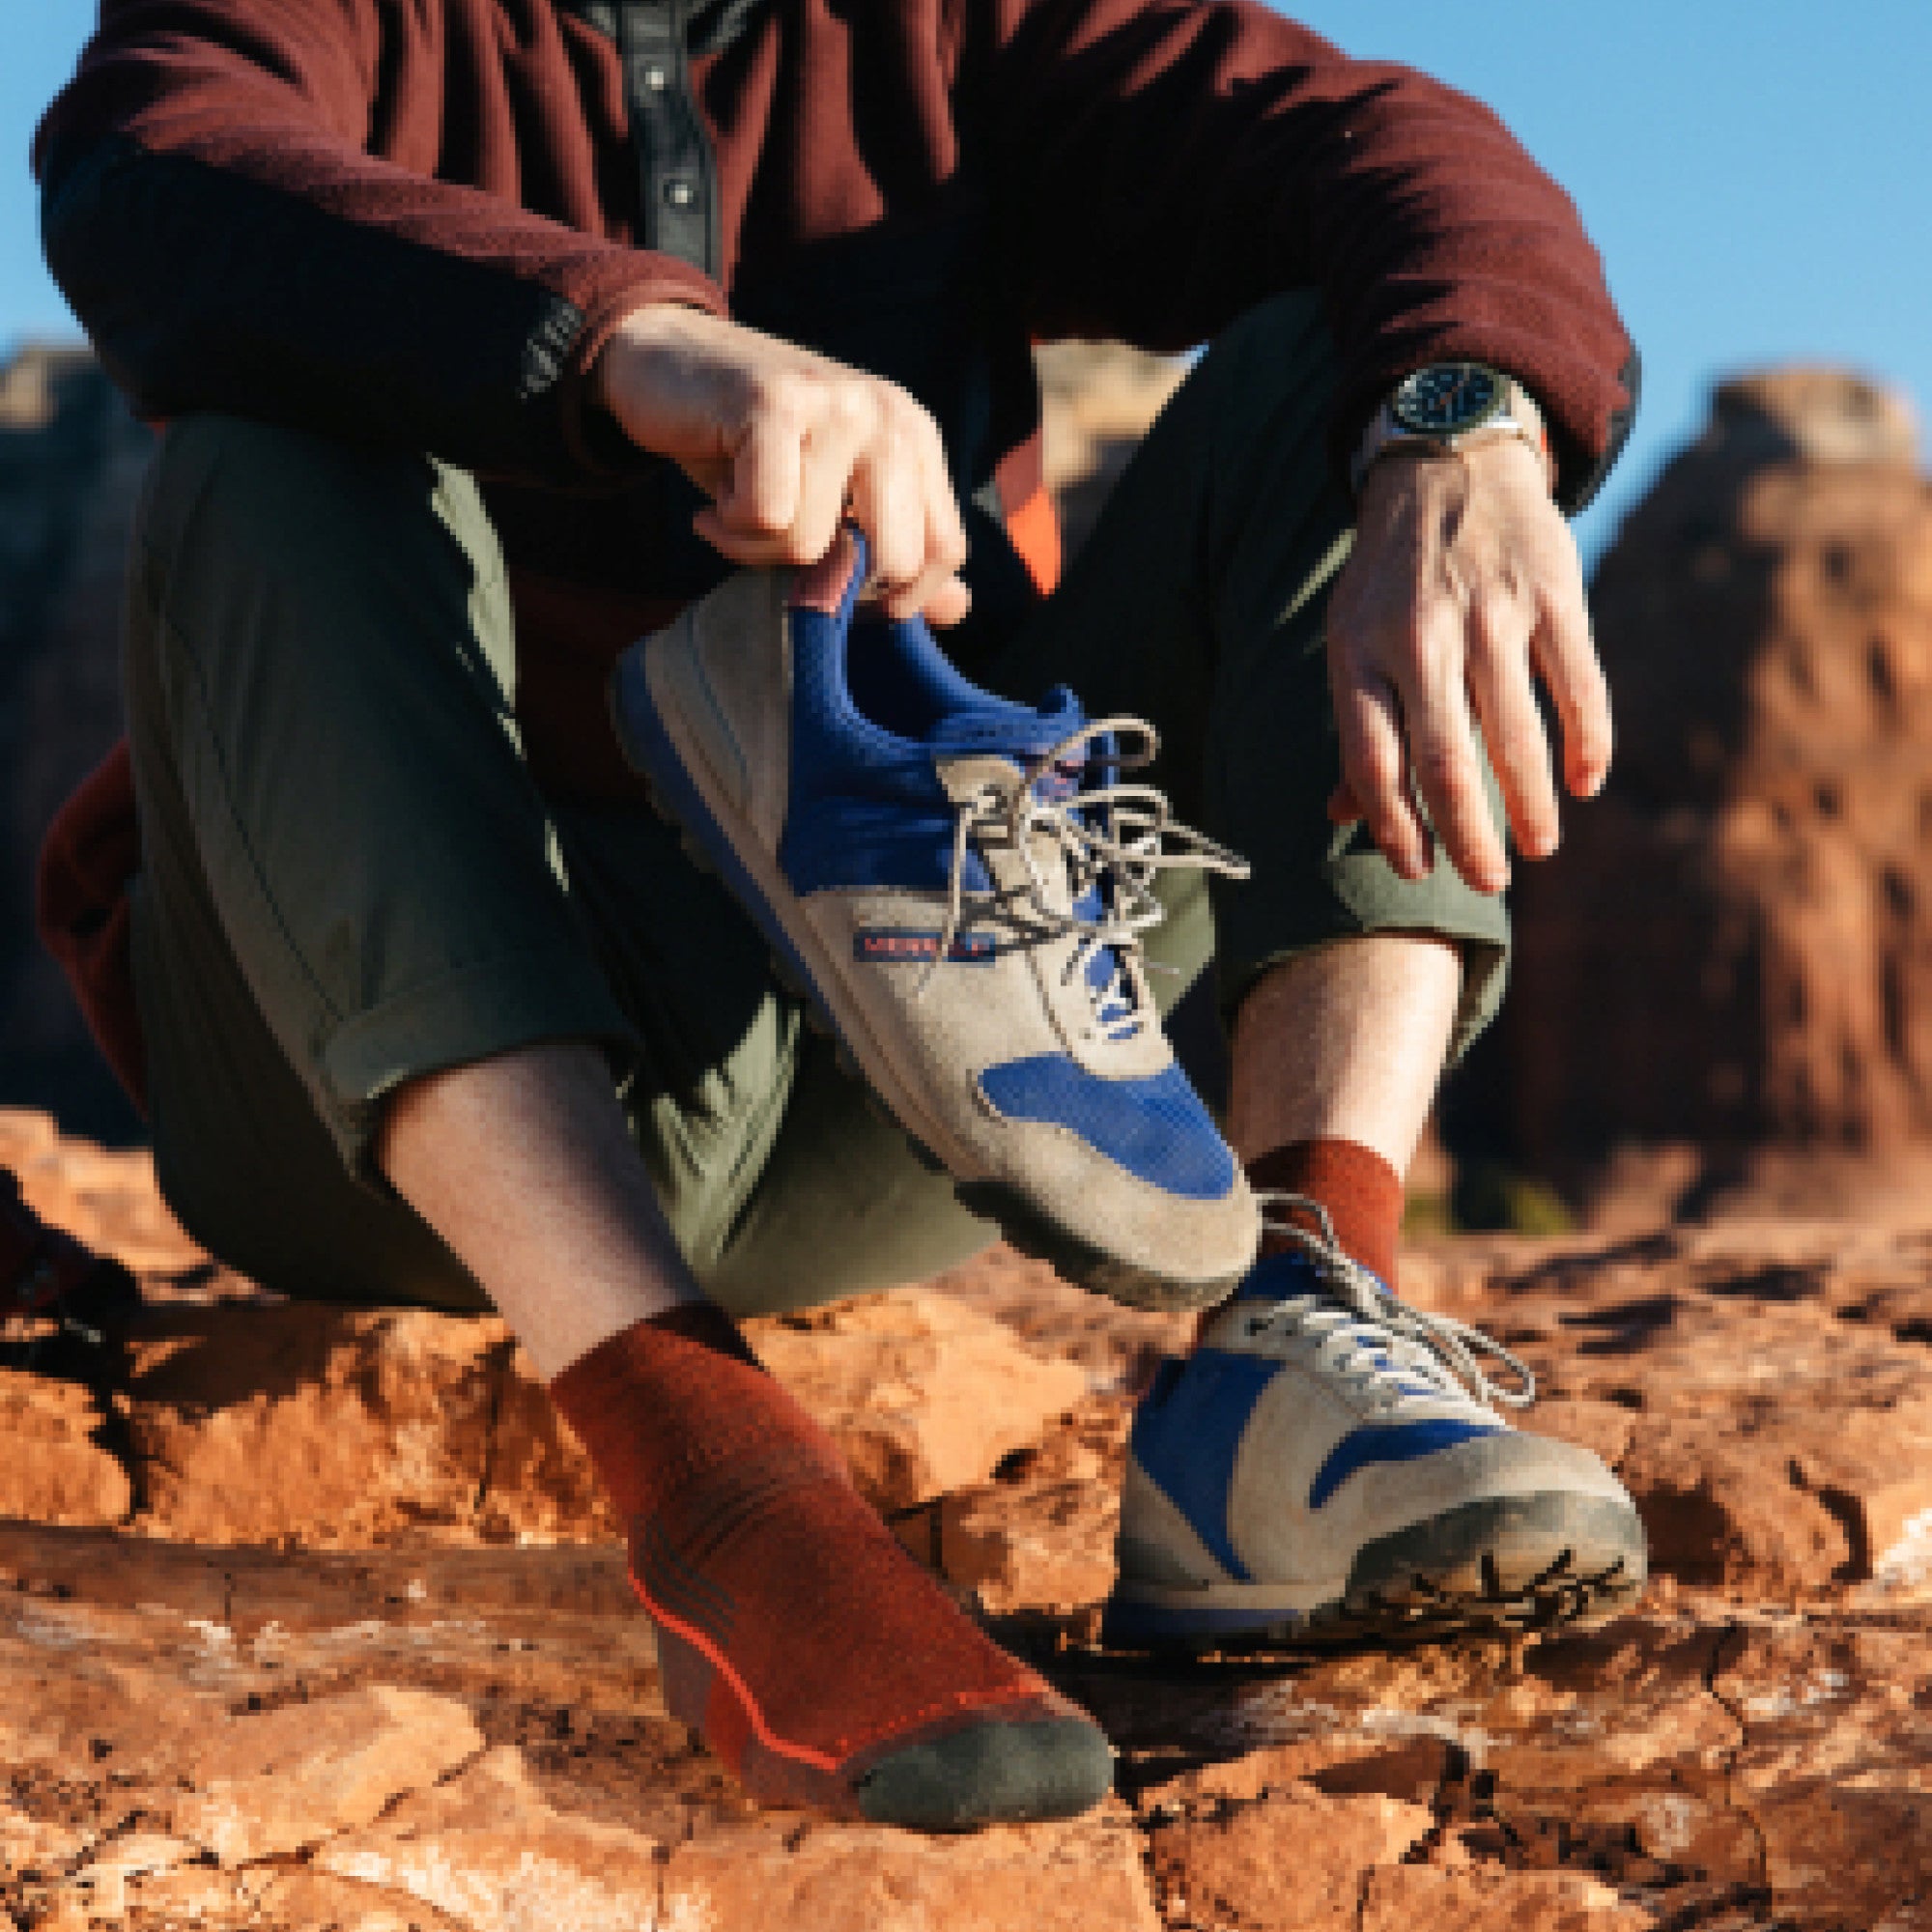 Image of model sitting on red desert rocks wearing 1959 socks in chestnut colorway while wearing one blue hiking shoe and holding the other